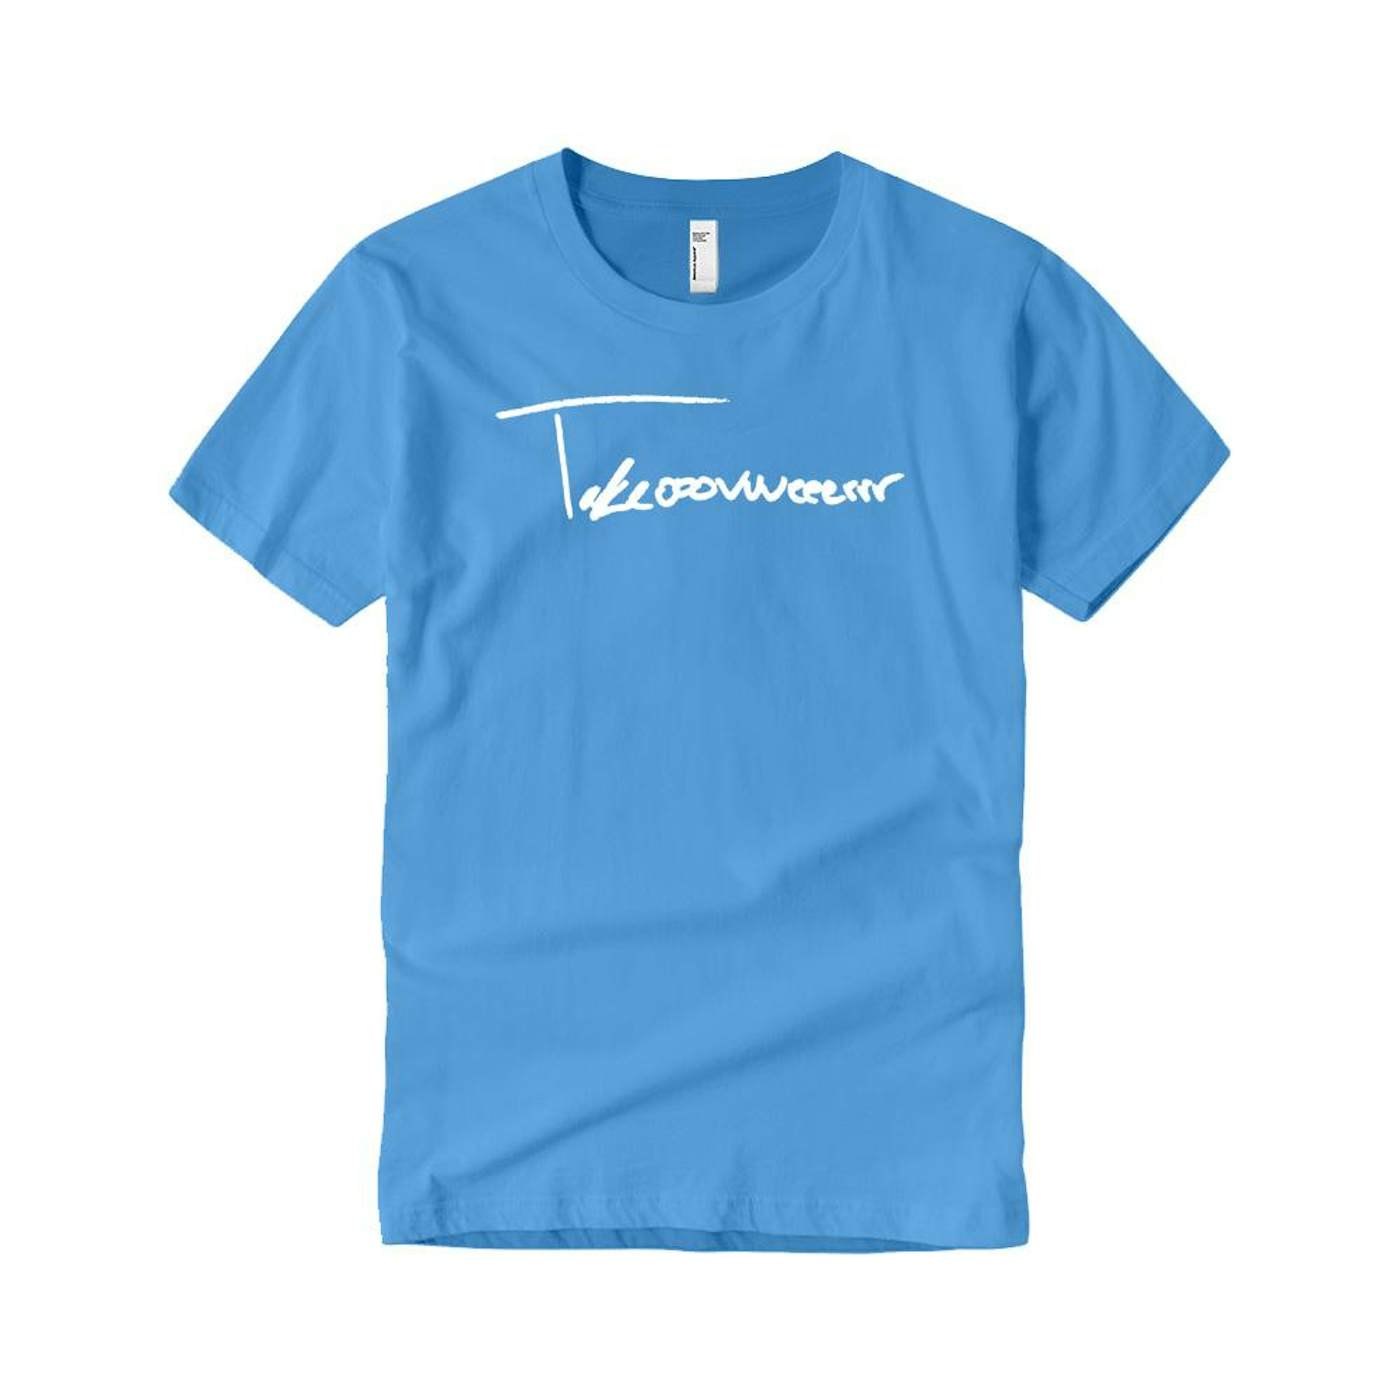 Taylor J Takeover Signature T-Shirt (Baby Blue/White)